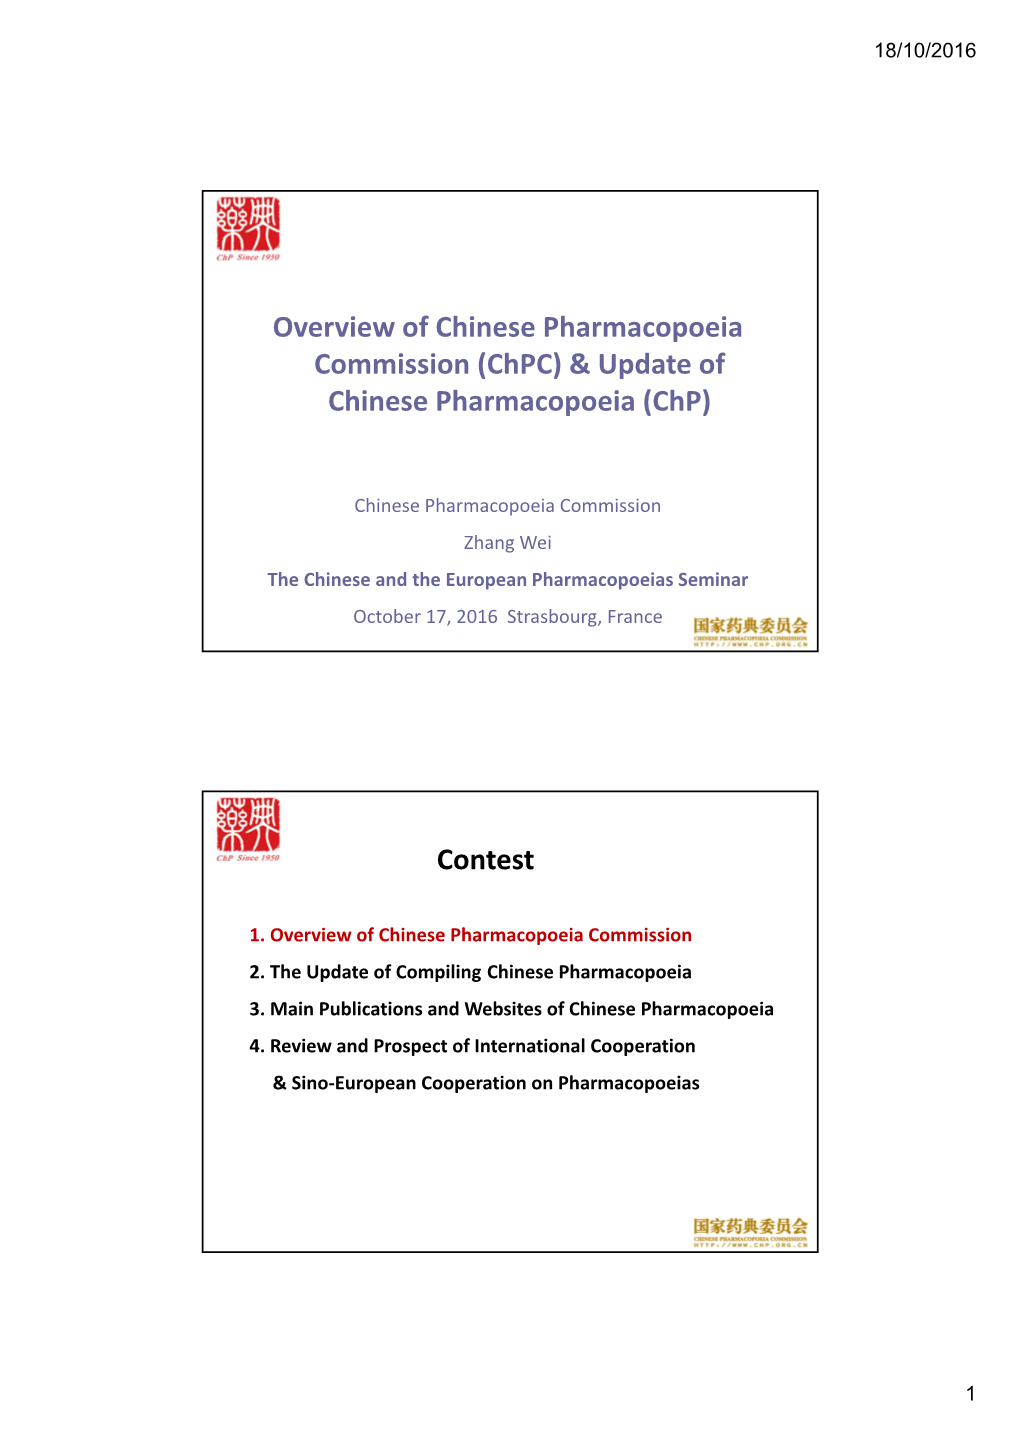 Overview of Chinese Pharmacopoeia Commission (Chpc) & Update of Chinese Pharmacopoeia (Chp)